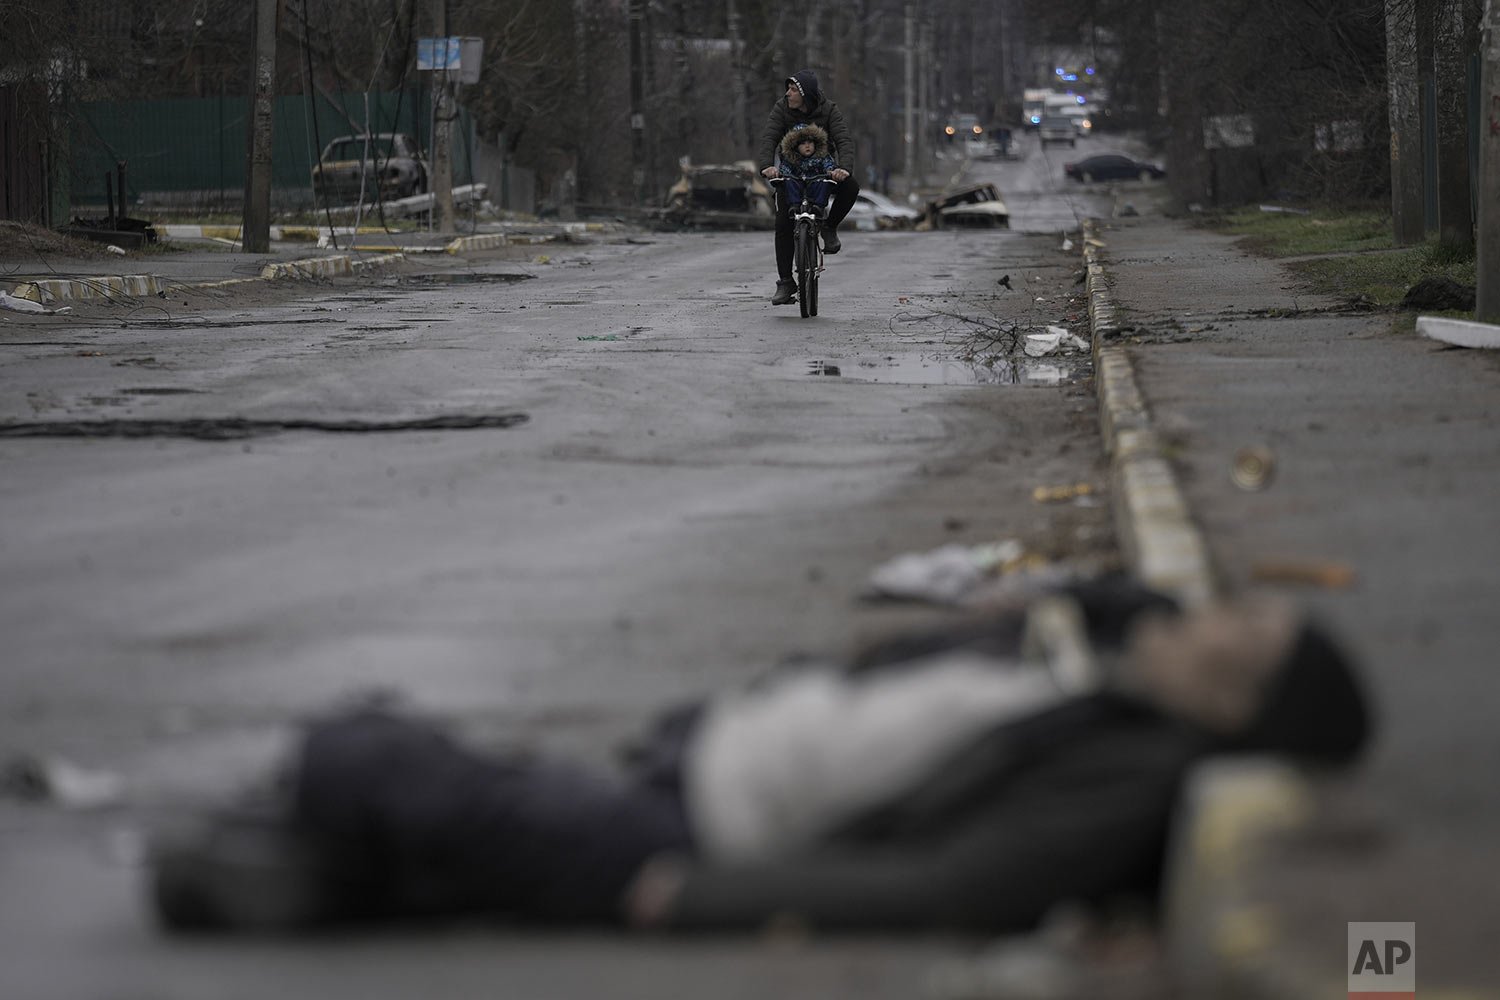  A man and child on a bicycle come across the body of a civilian lying on a street in the formerly Russian-occupied Kyiv suburb of Bucha, Ukraine, Saturday, April 2, 2022. (AP Photo/Vadim Ghirda) 